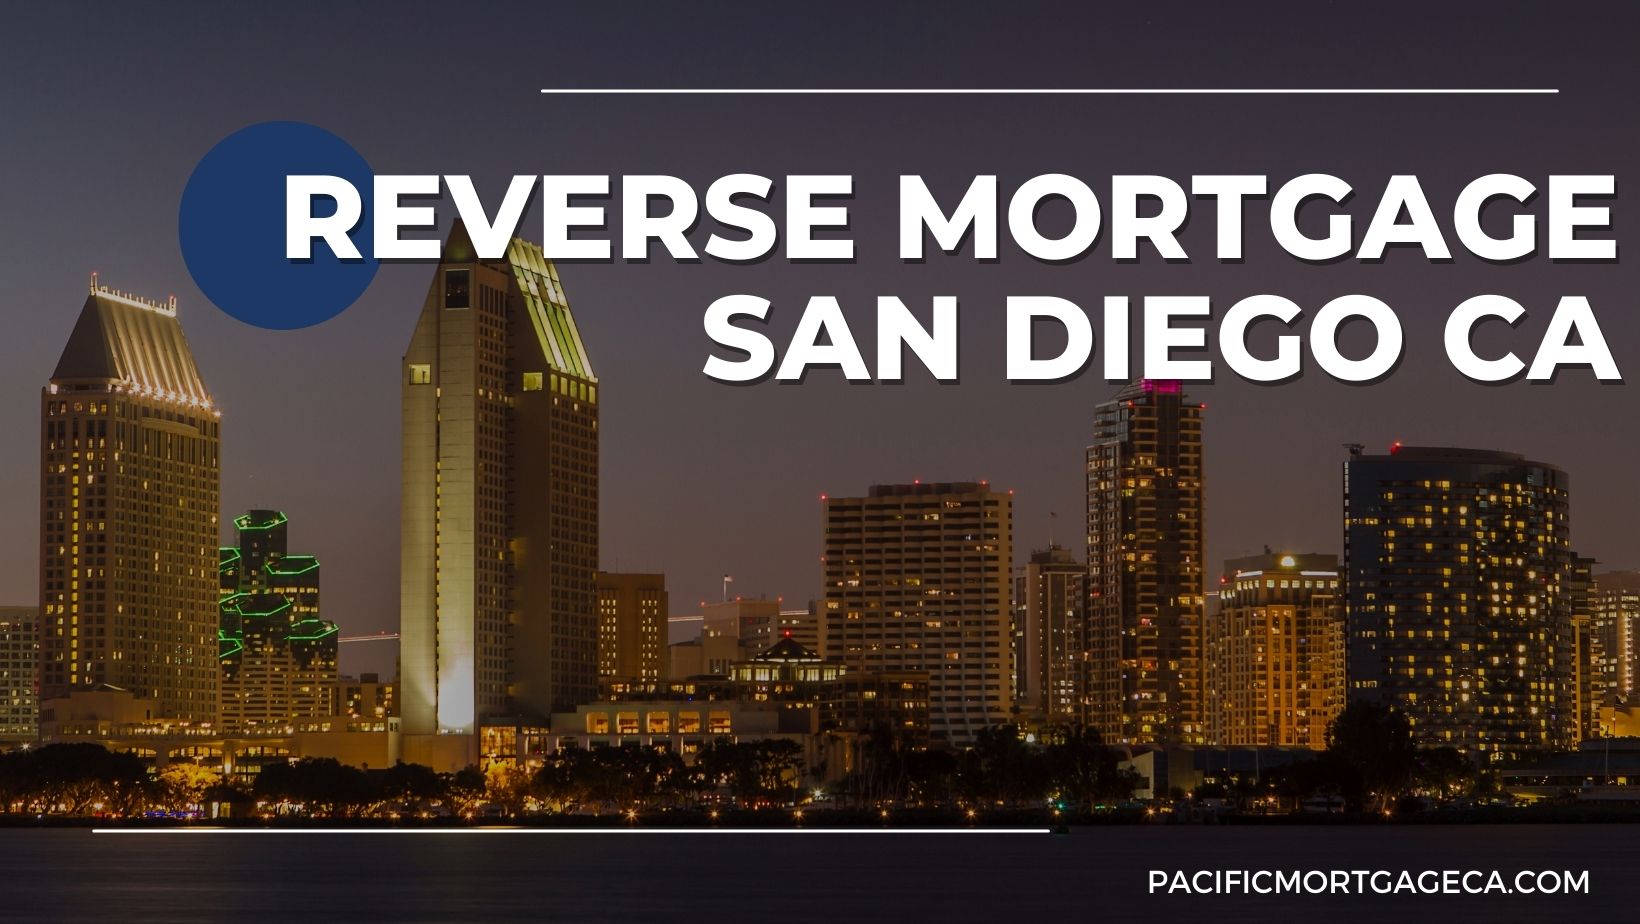 Reverse Mortgage in San Diego